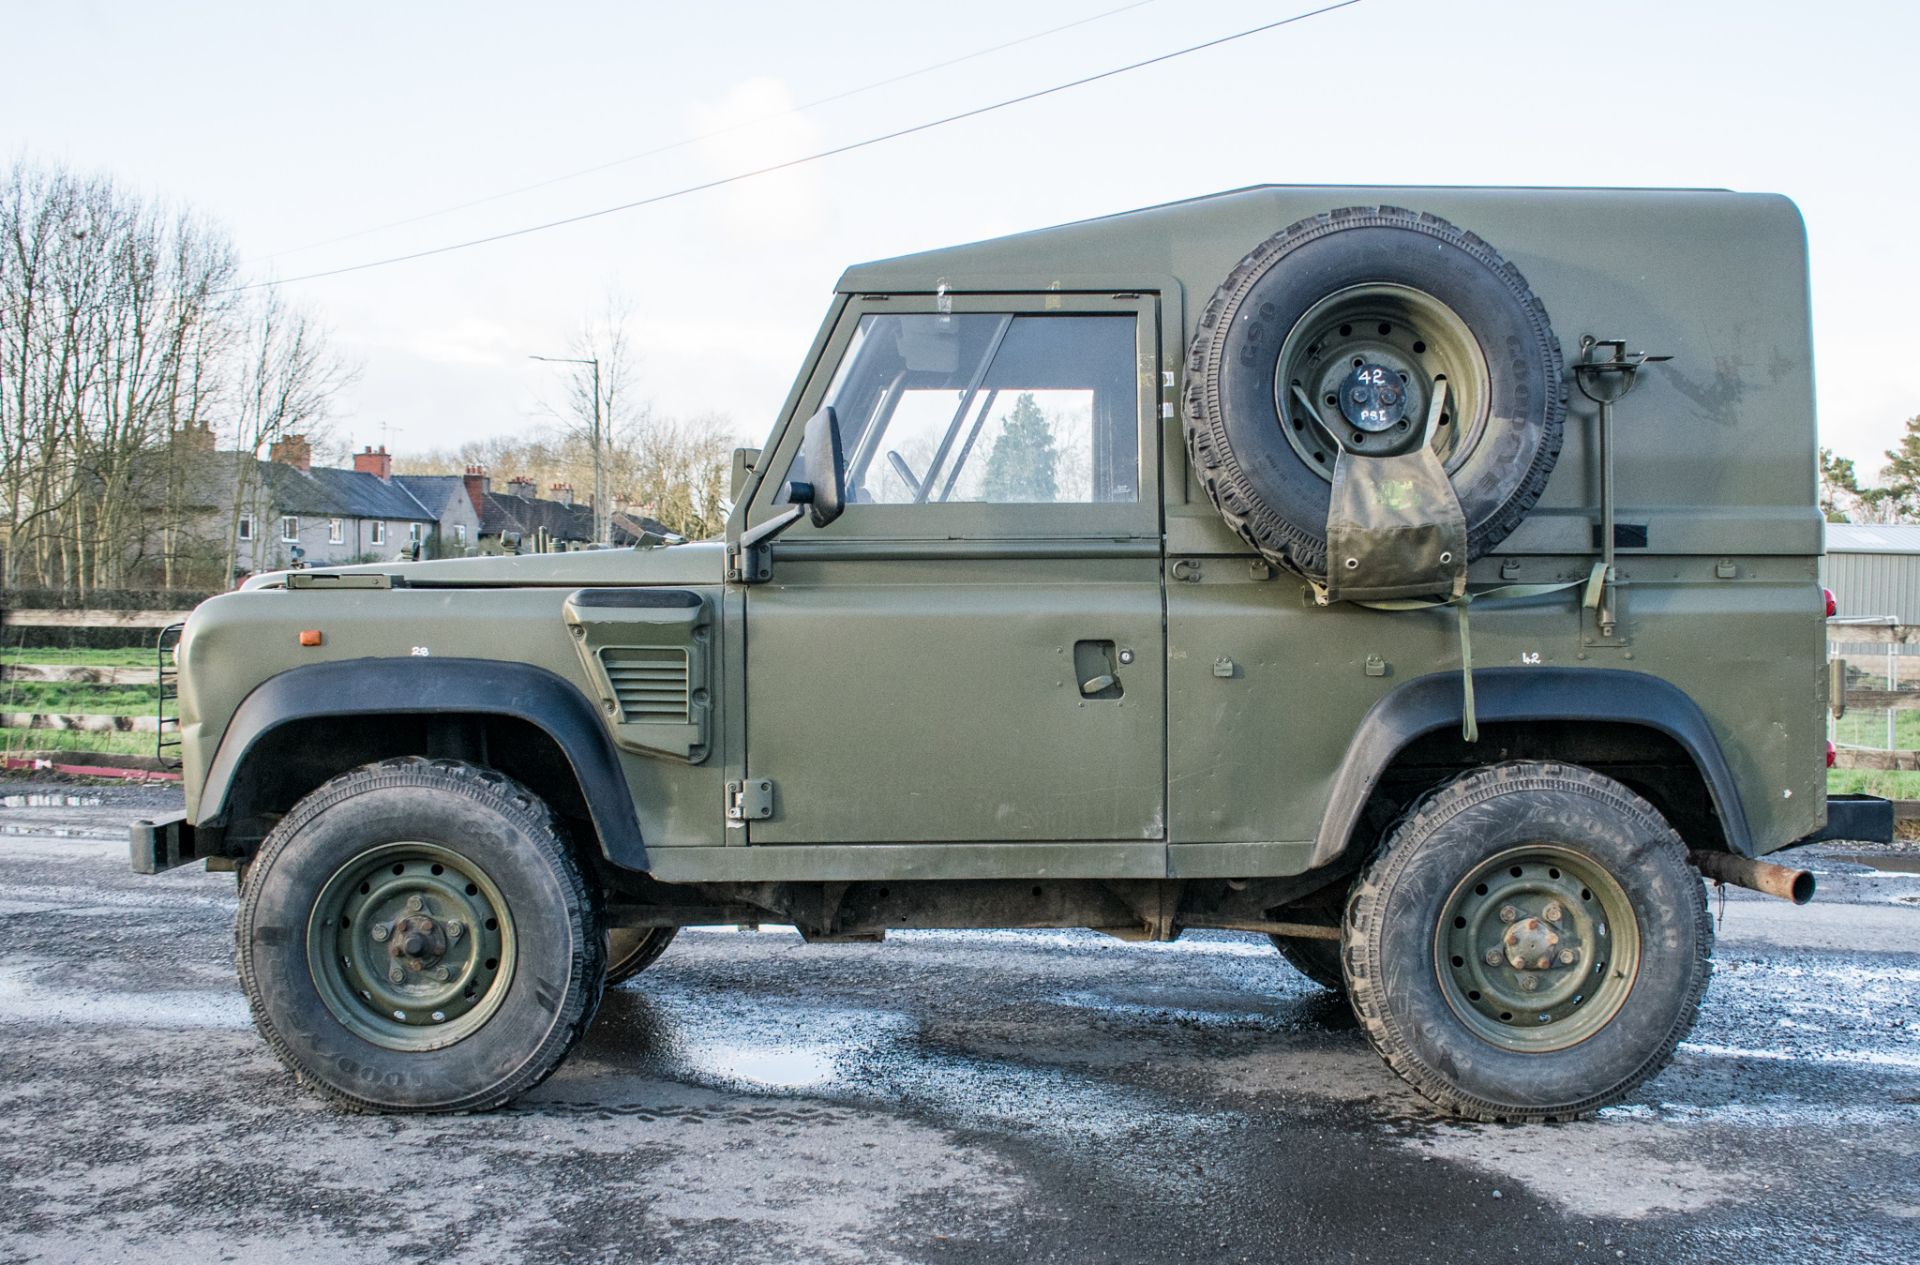 Land Rover Defender 90 Wolf 300 TDI 4wd TUL hard top utility vehicle (EX MOD) Date into Service: - Image 7 of 27